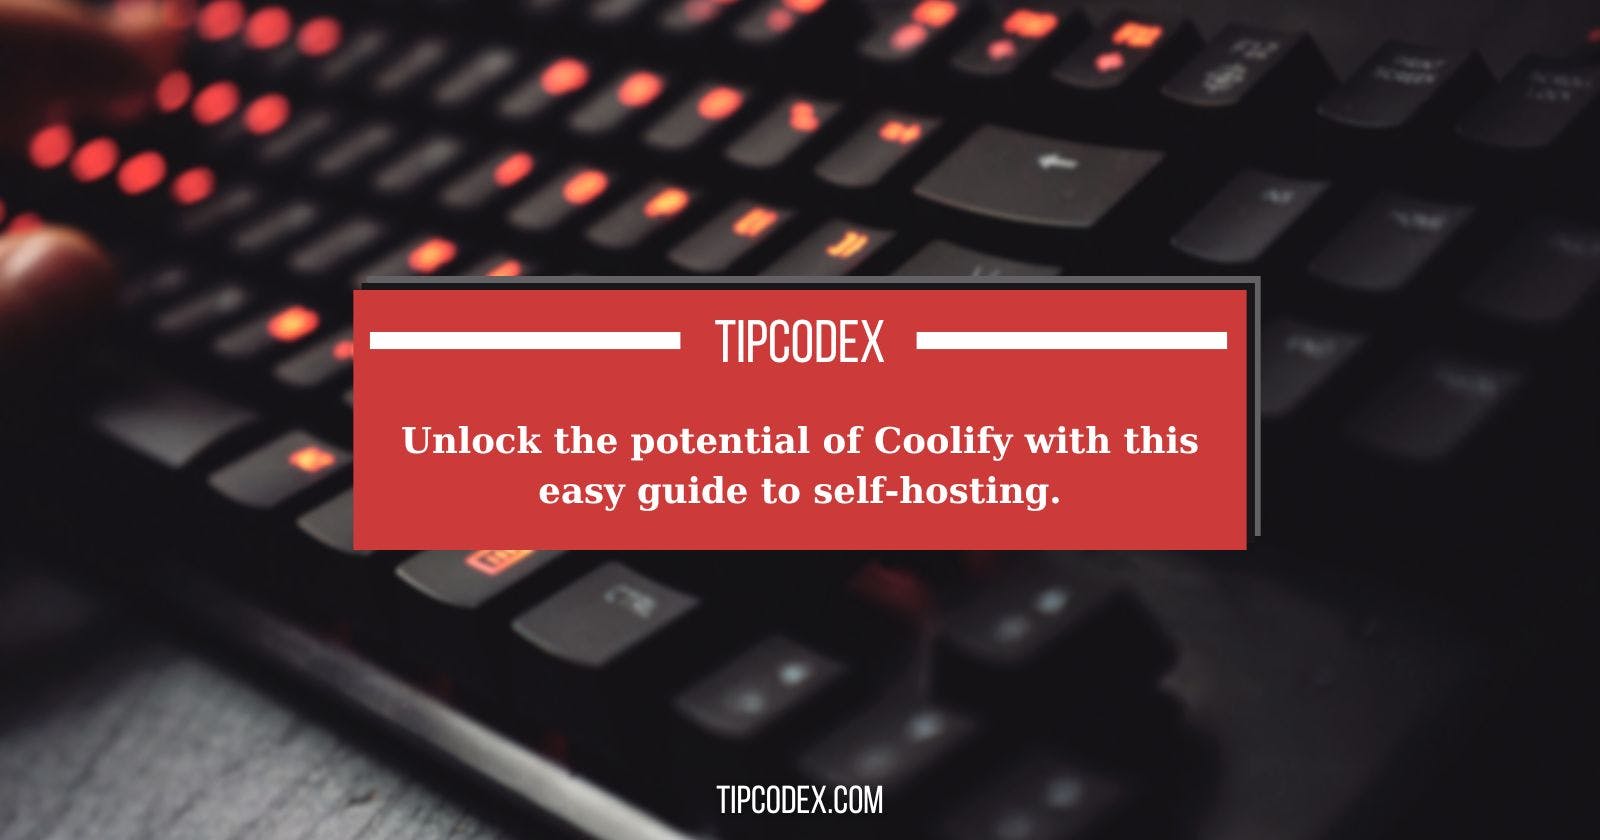 Unlock the potential of Coolify with this easy guide to self-hosting.